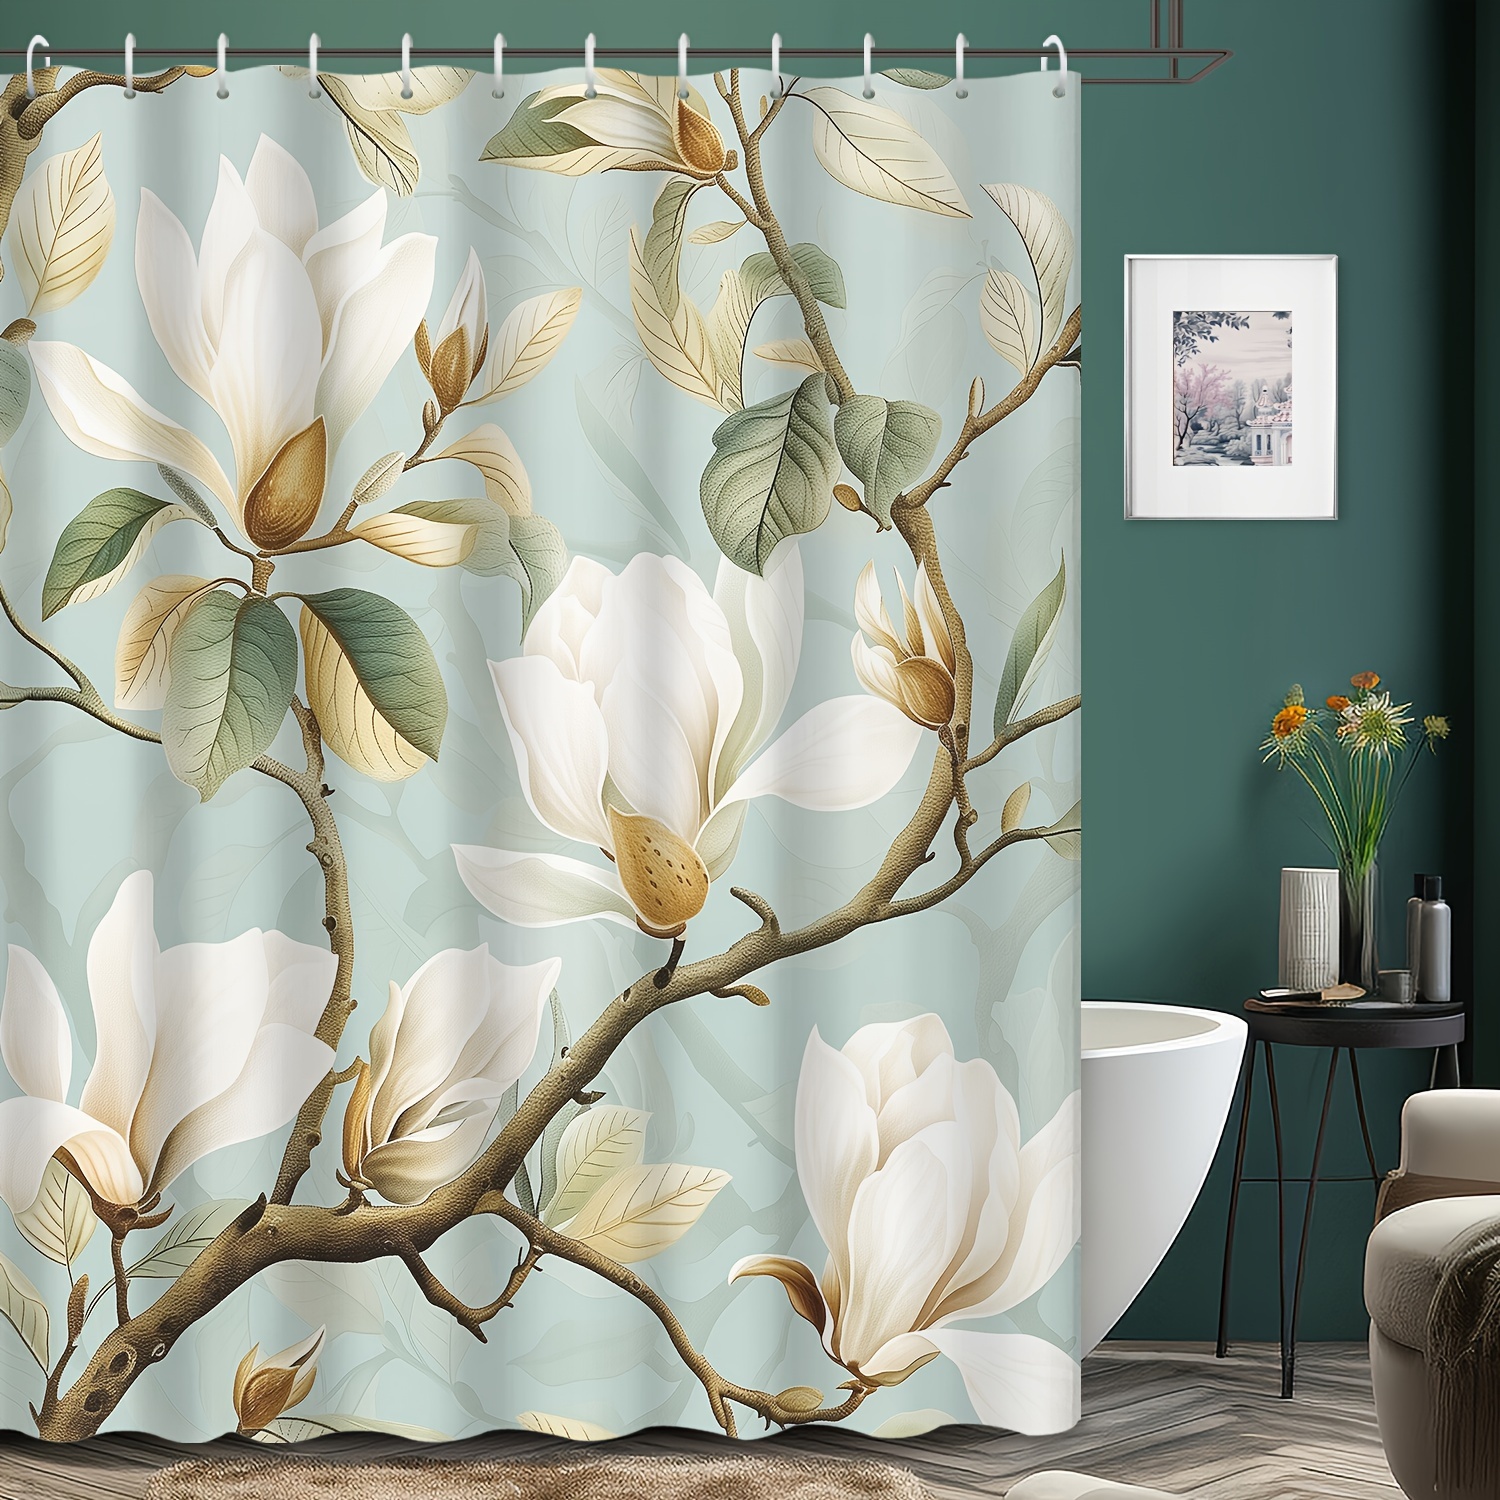 

Water-resistant Floral Shower Curtain With Hooks, Magnolia Print, Polyester Fabric, Machine Washable, Grommet Top, For Bathroom Decor, 72 X 72 Inches